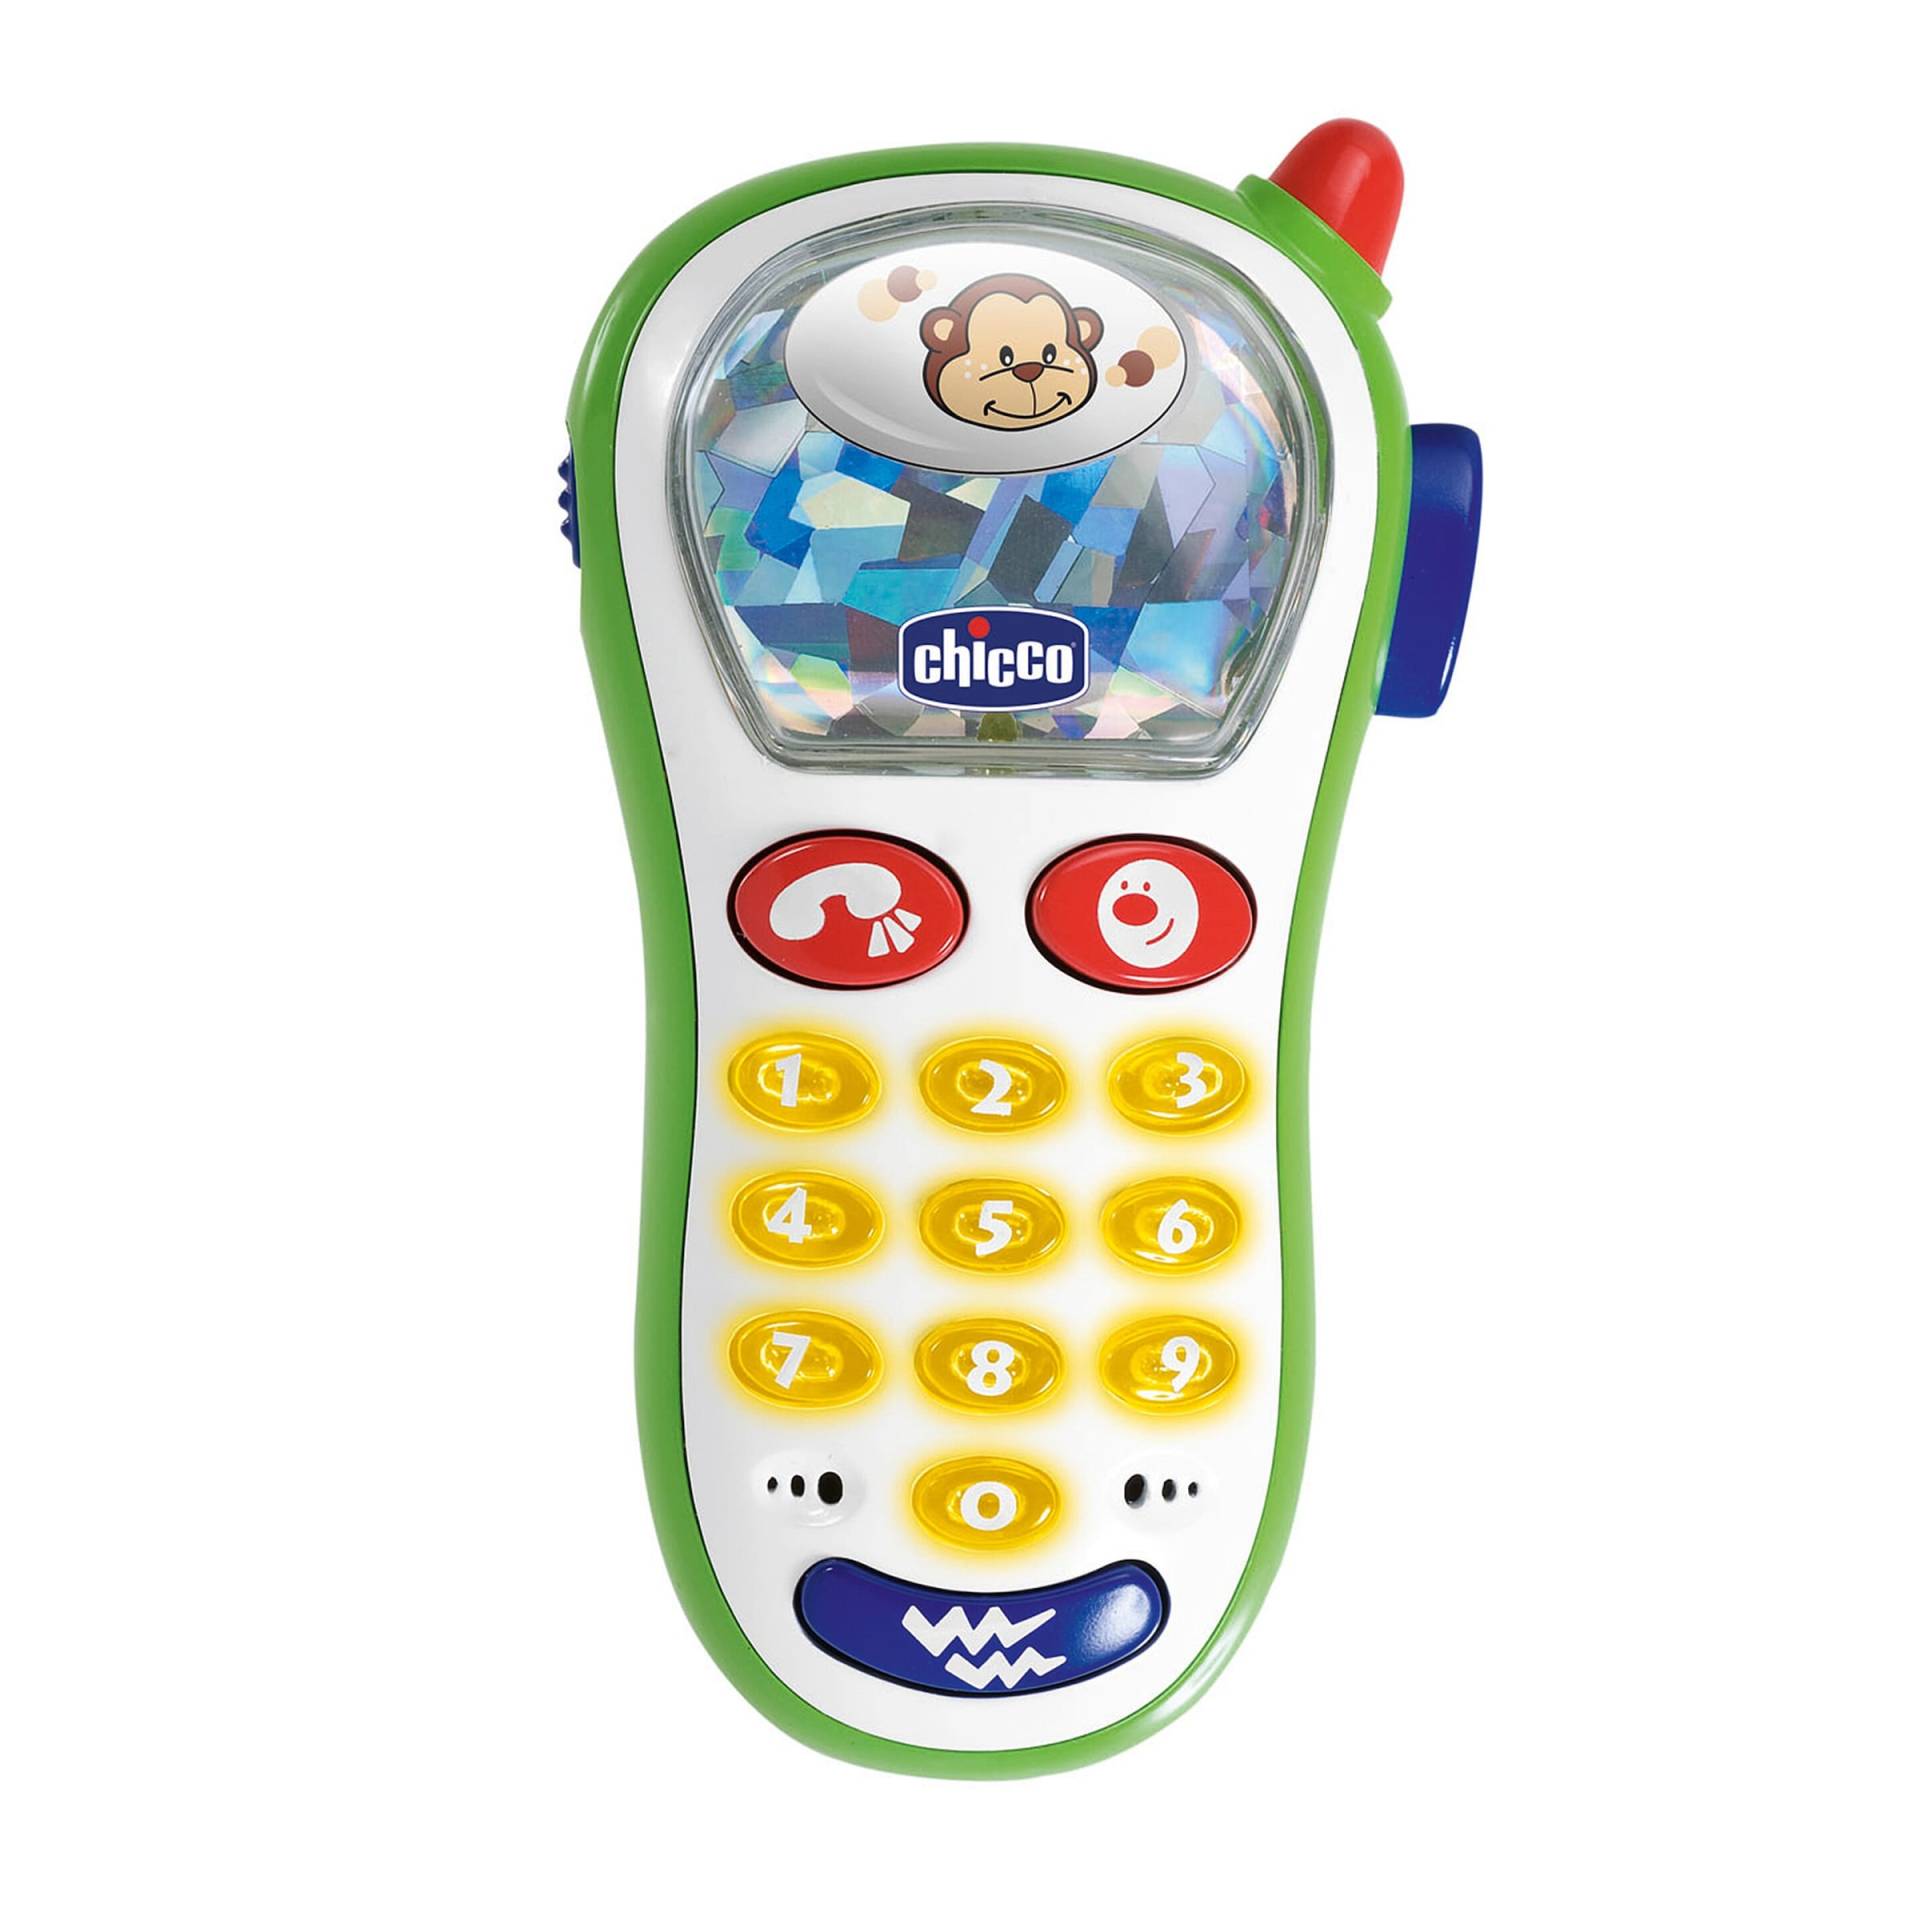 Chicco Musikspielzeug Baby's Fotohandy von Chicco